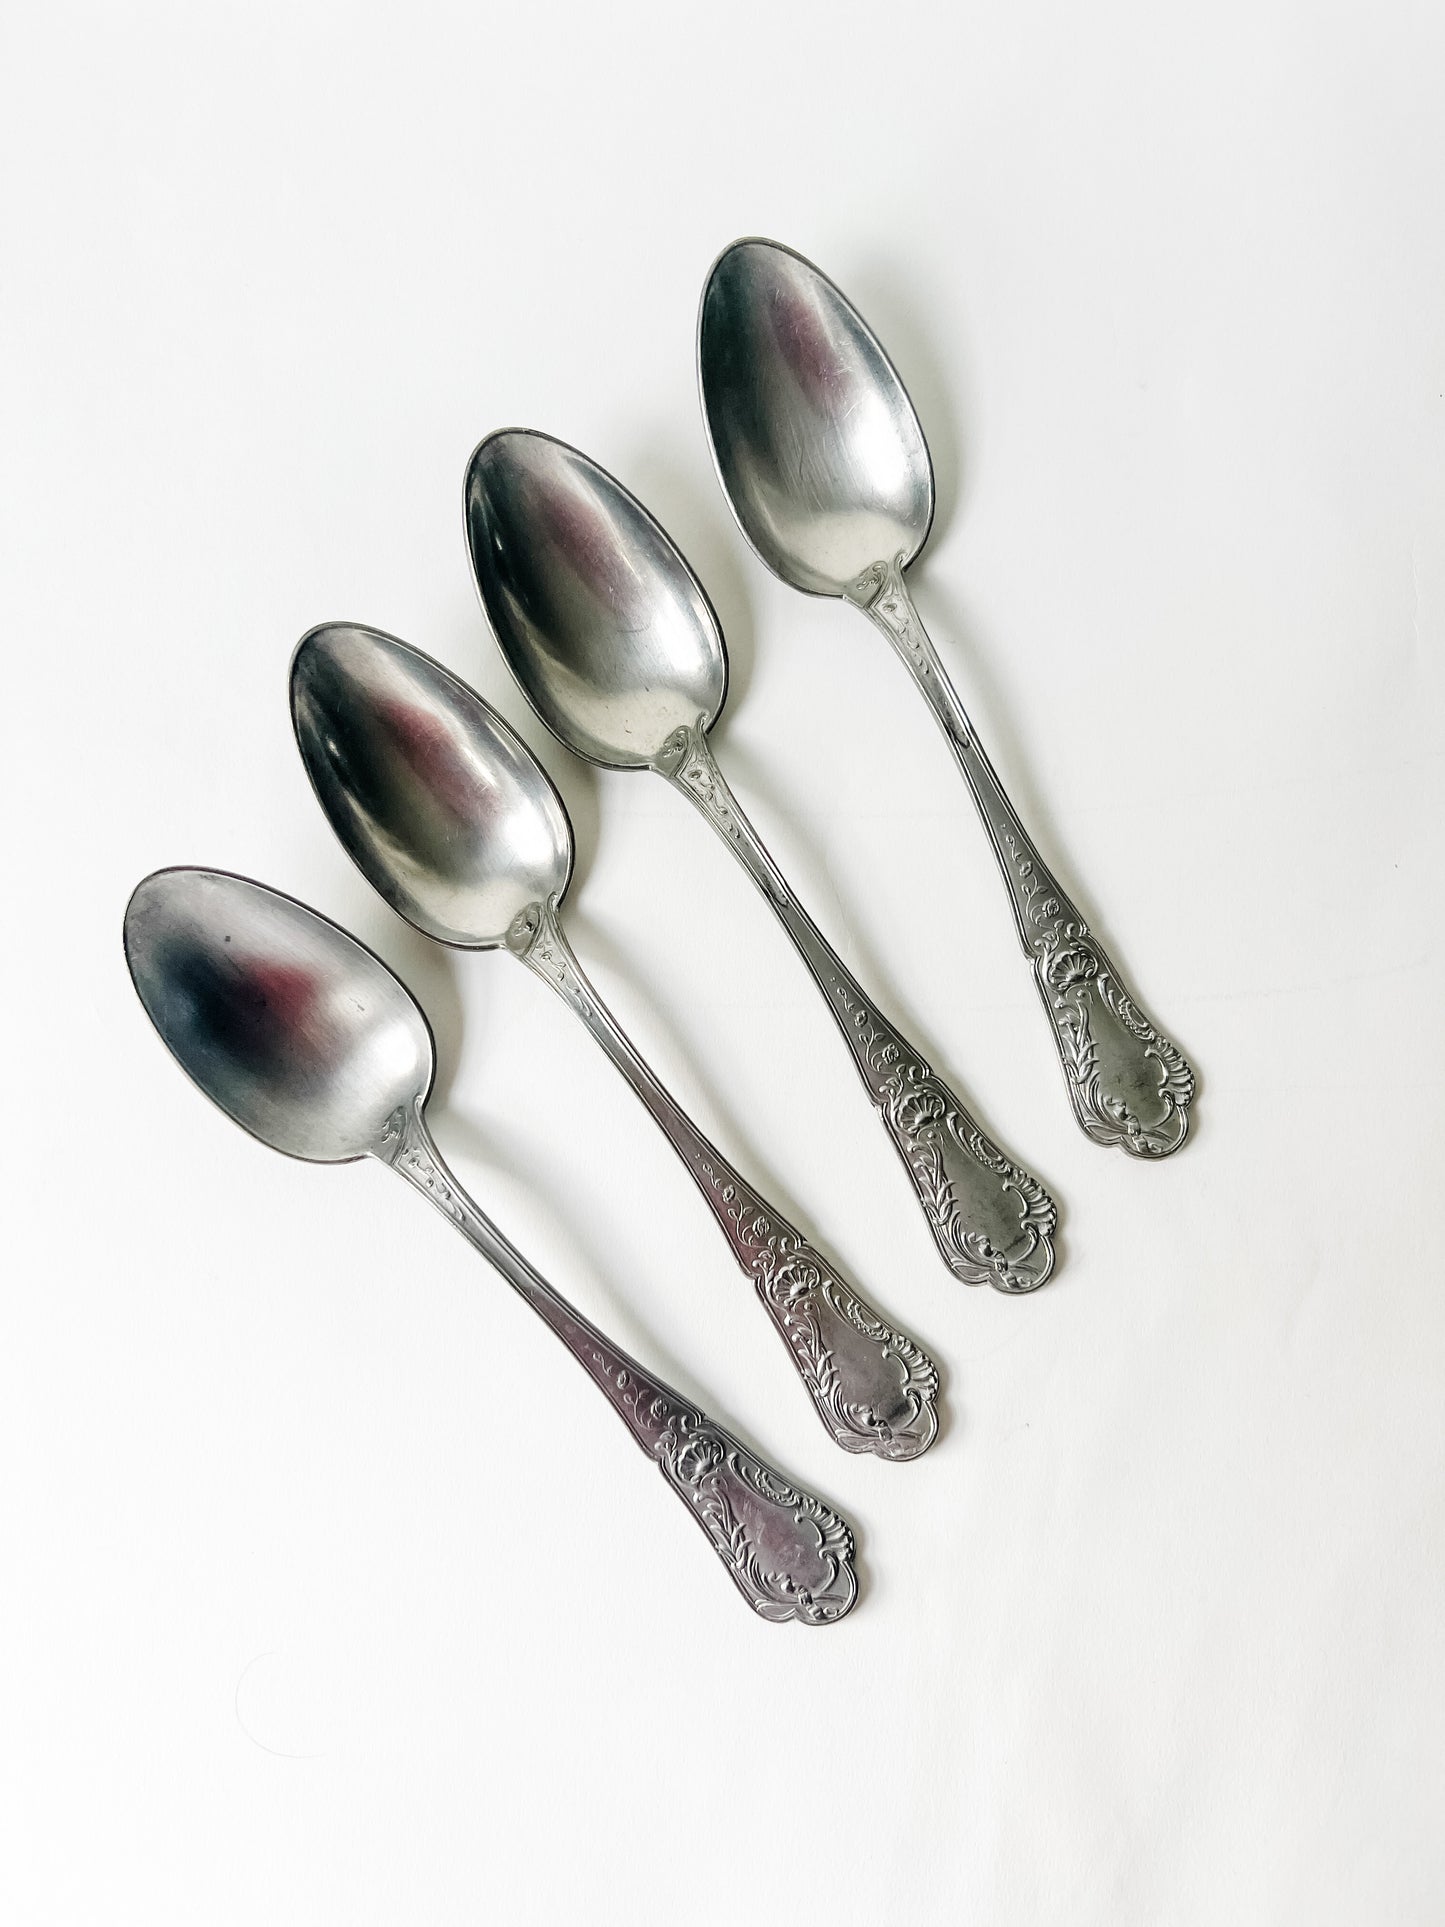 French Vintage Serving Spoons (set of 4)